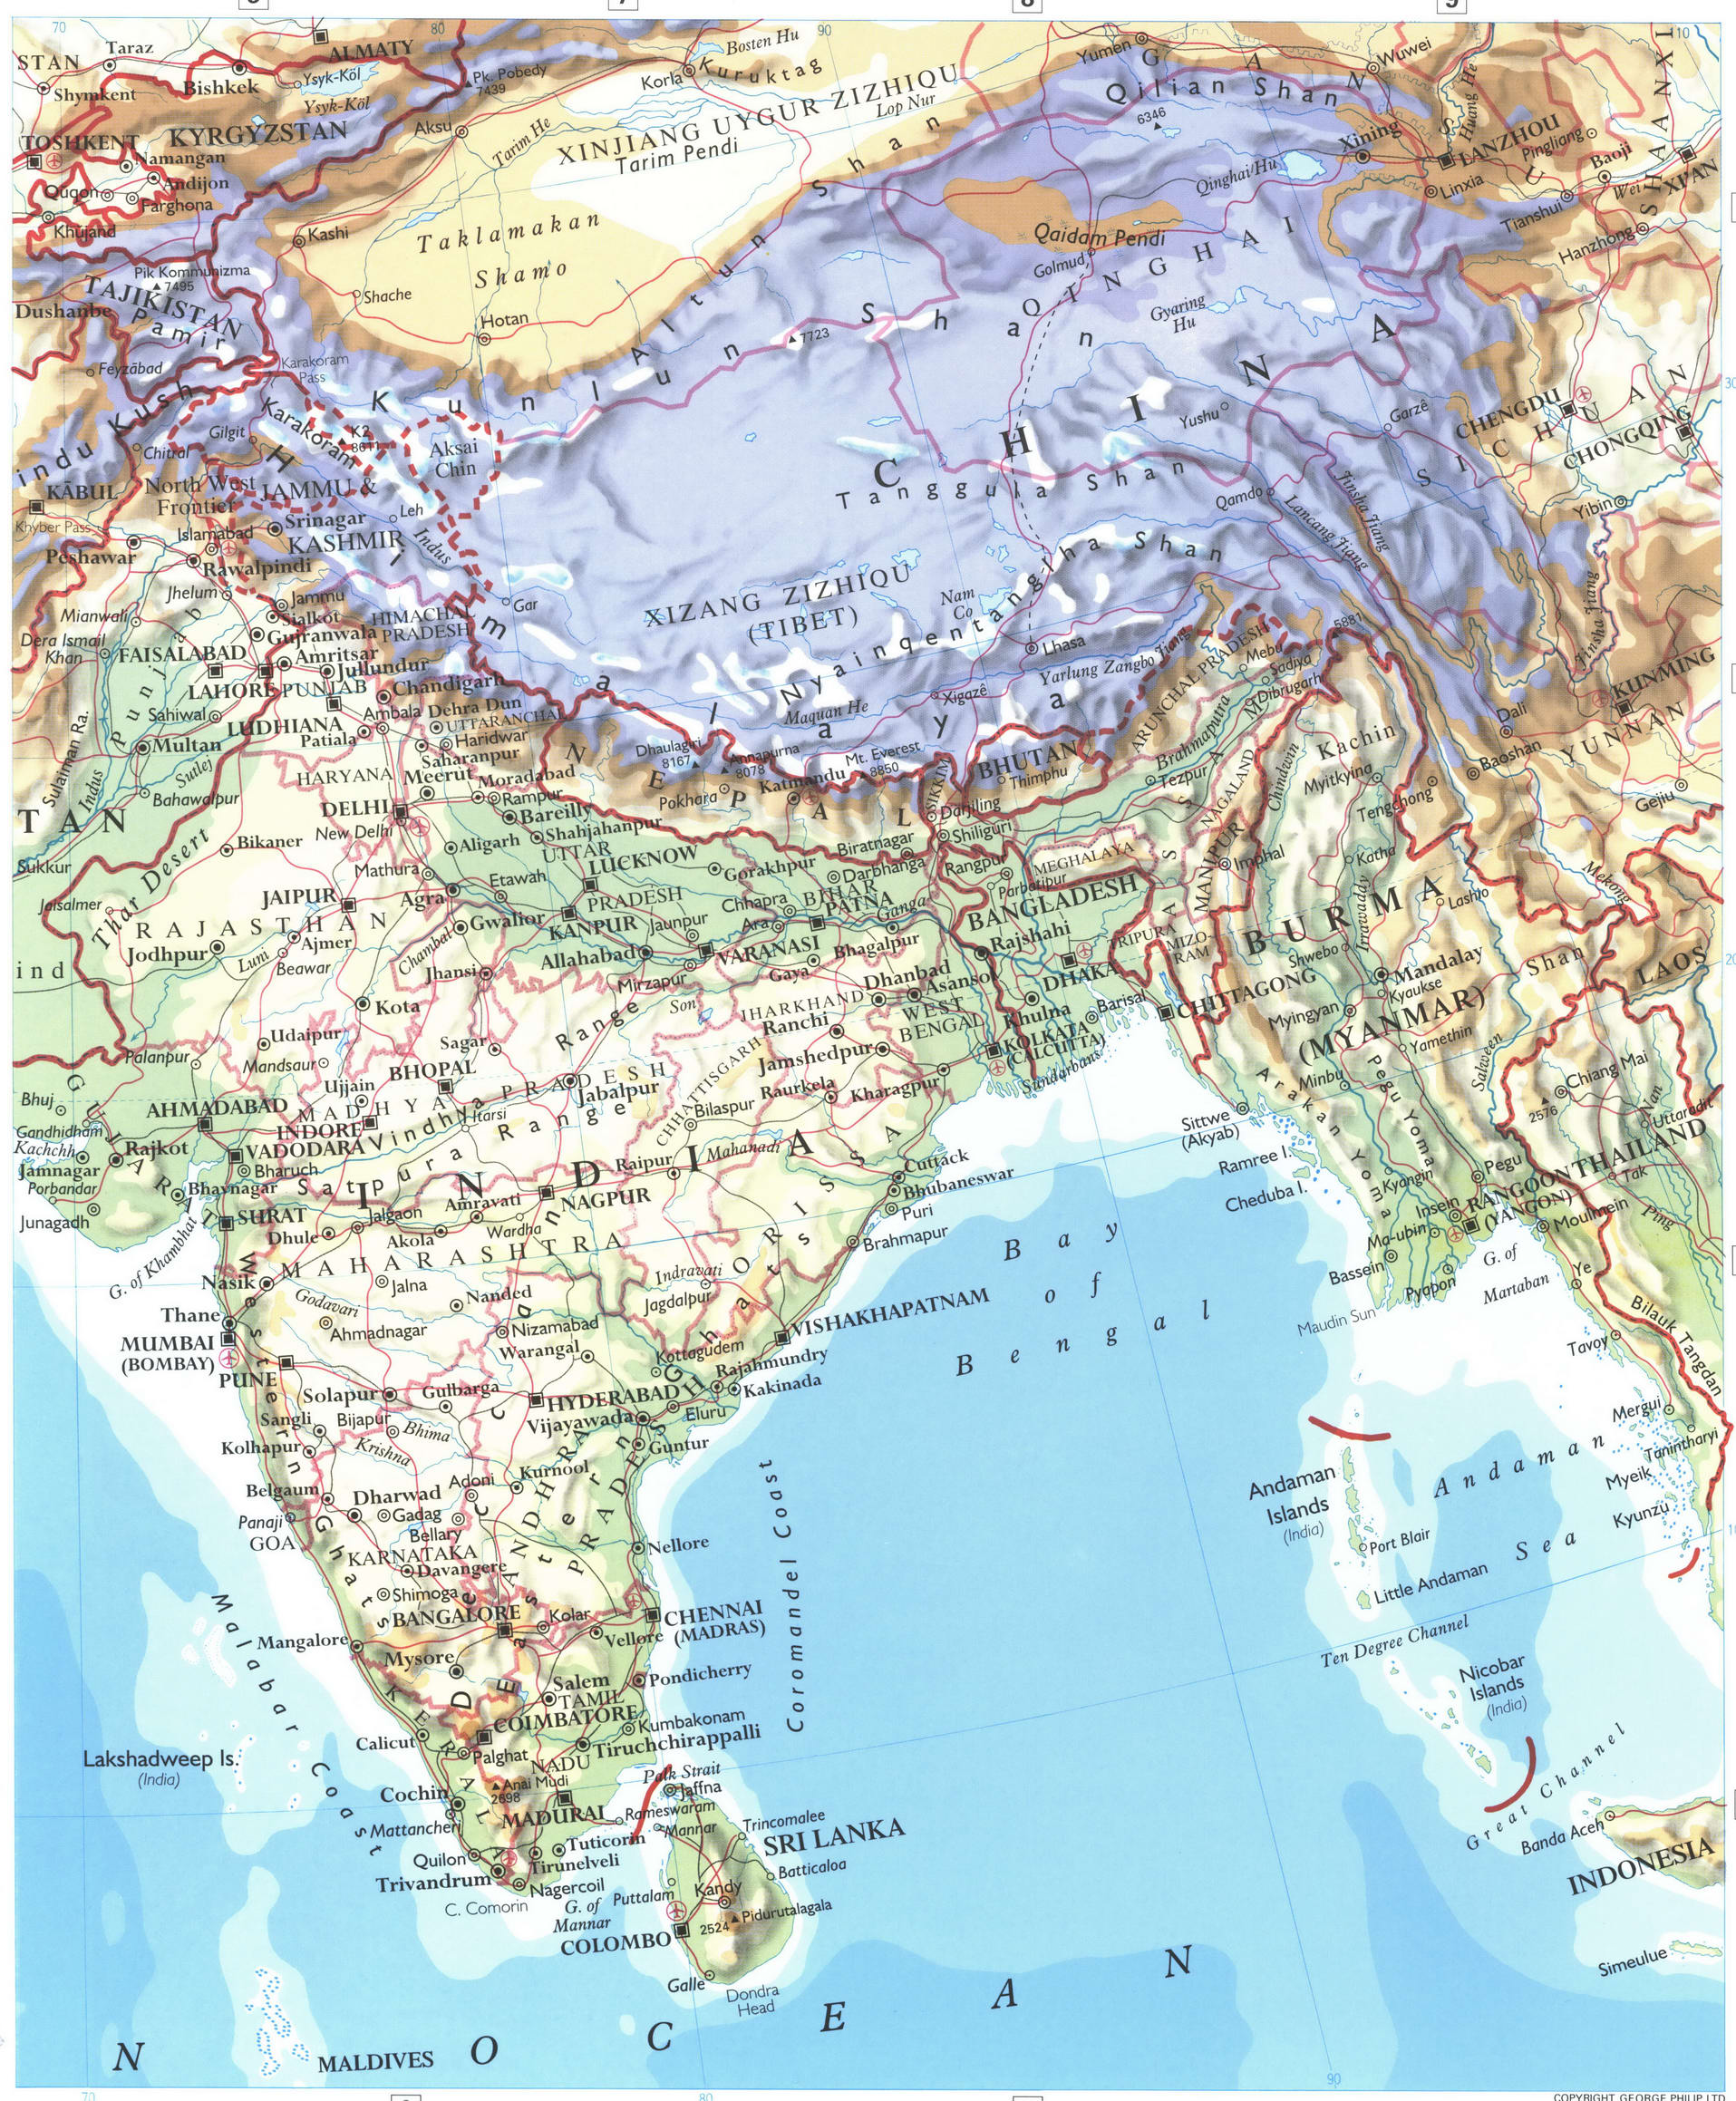 Southern Asia and Middle East map